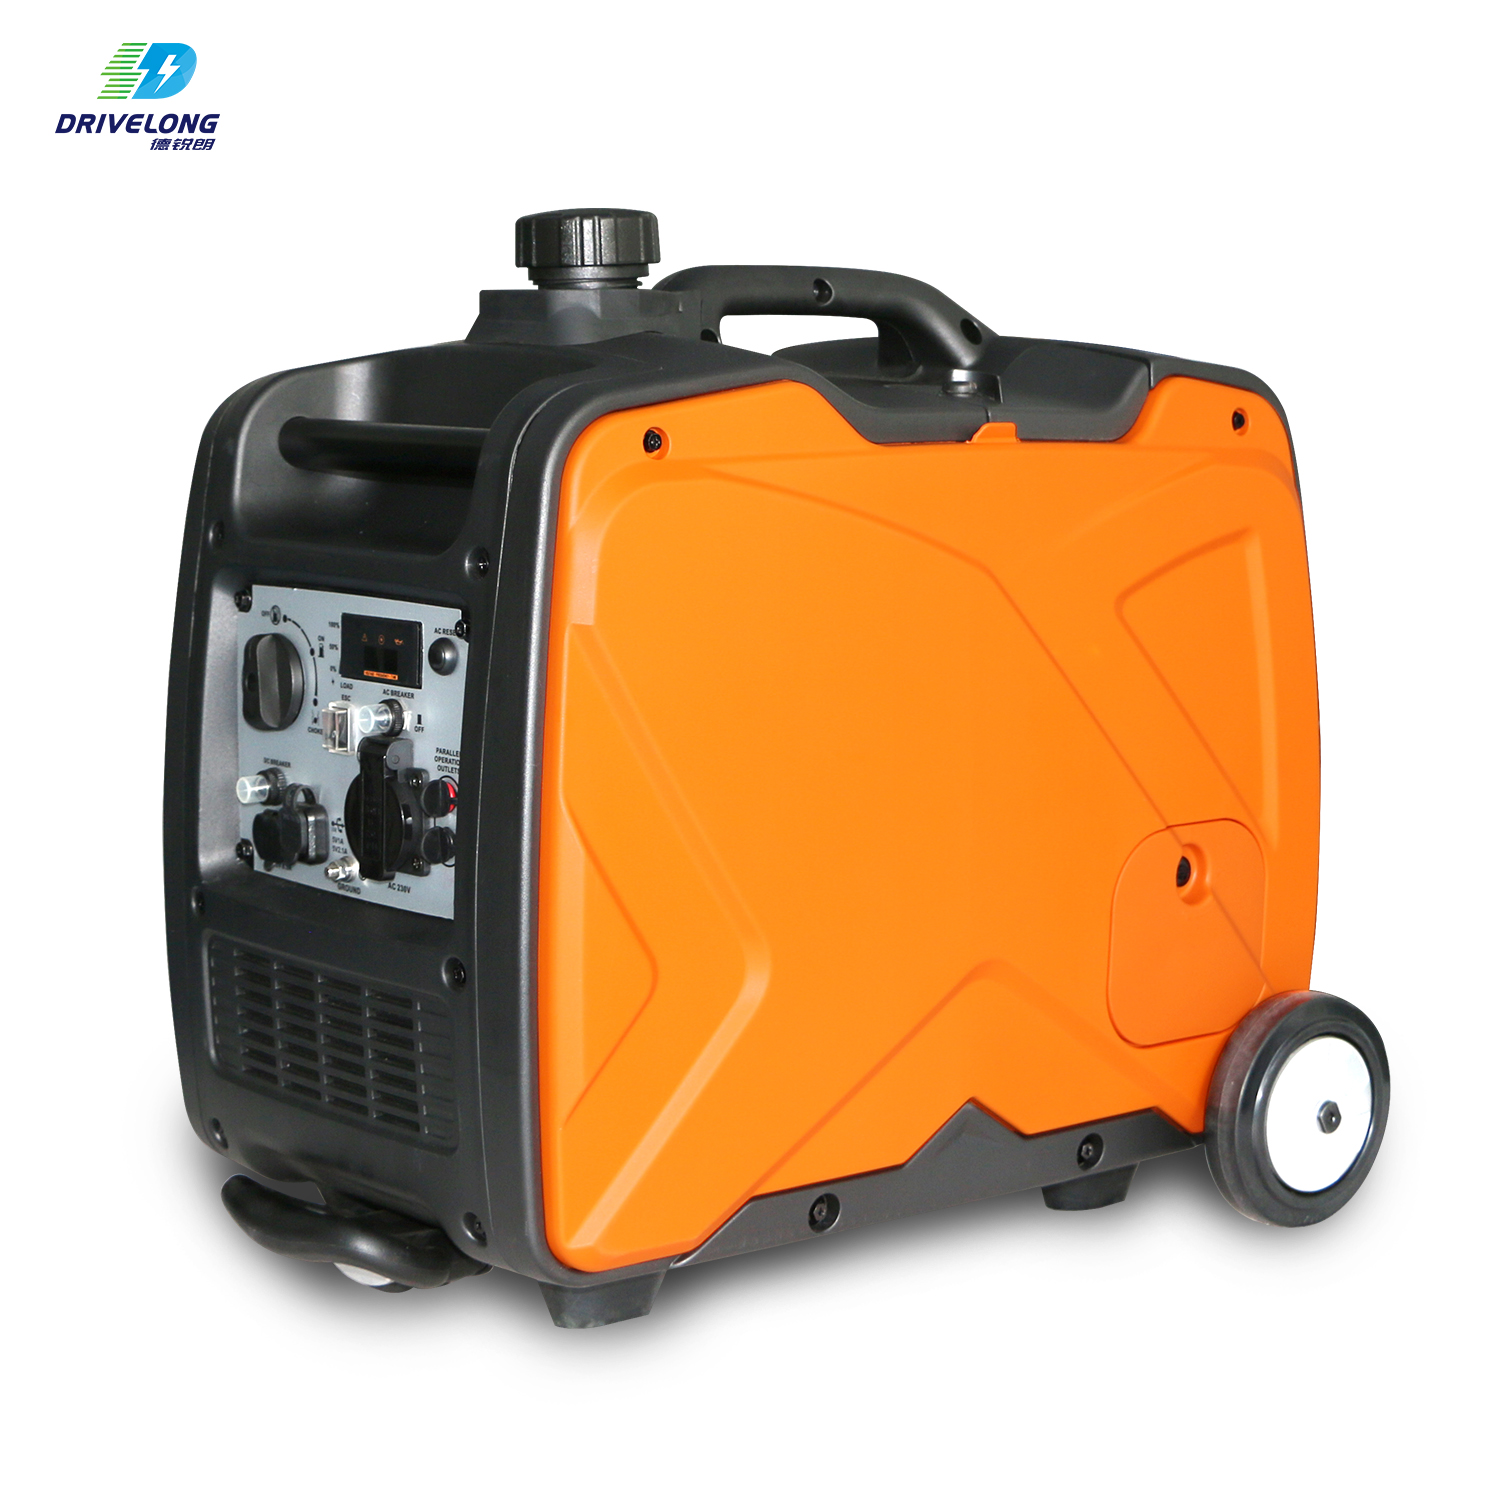 App Monitor Camping Gasoline Inverter Generator with Handle